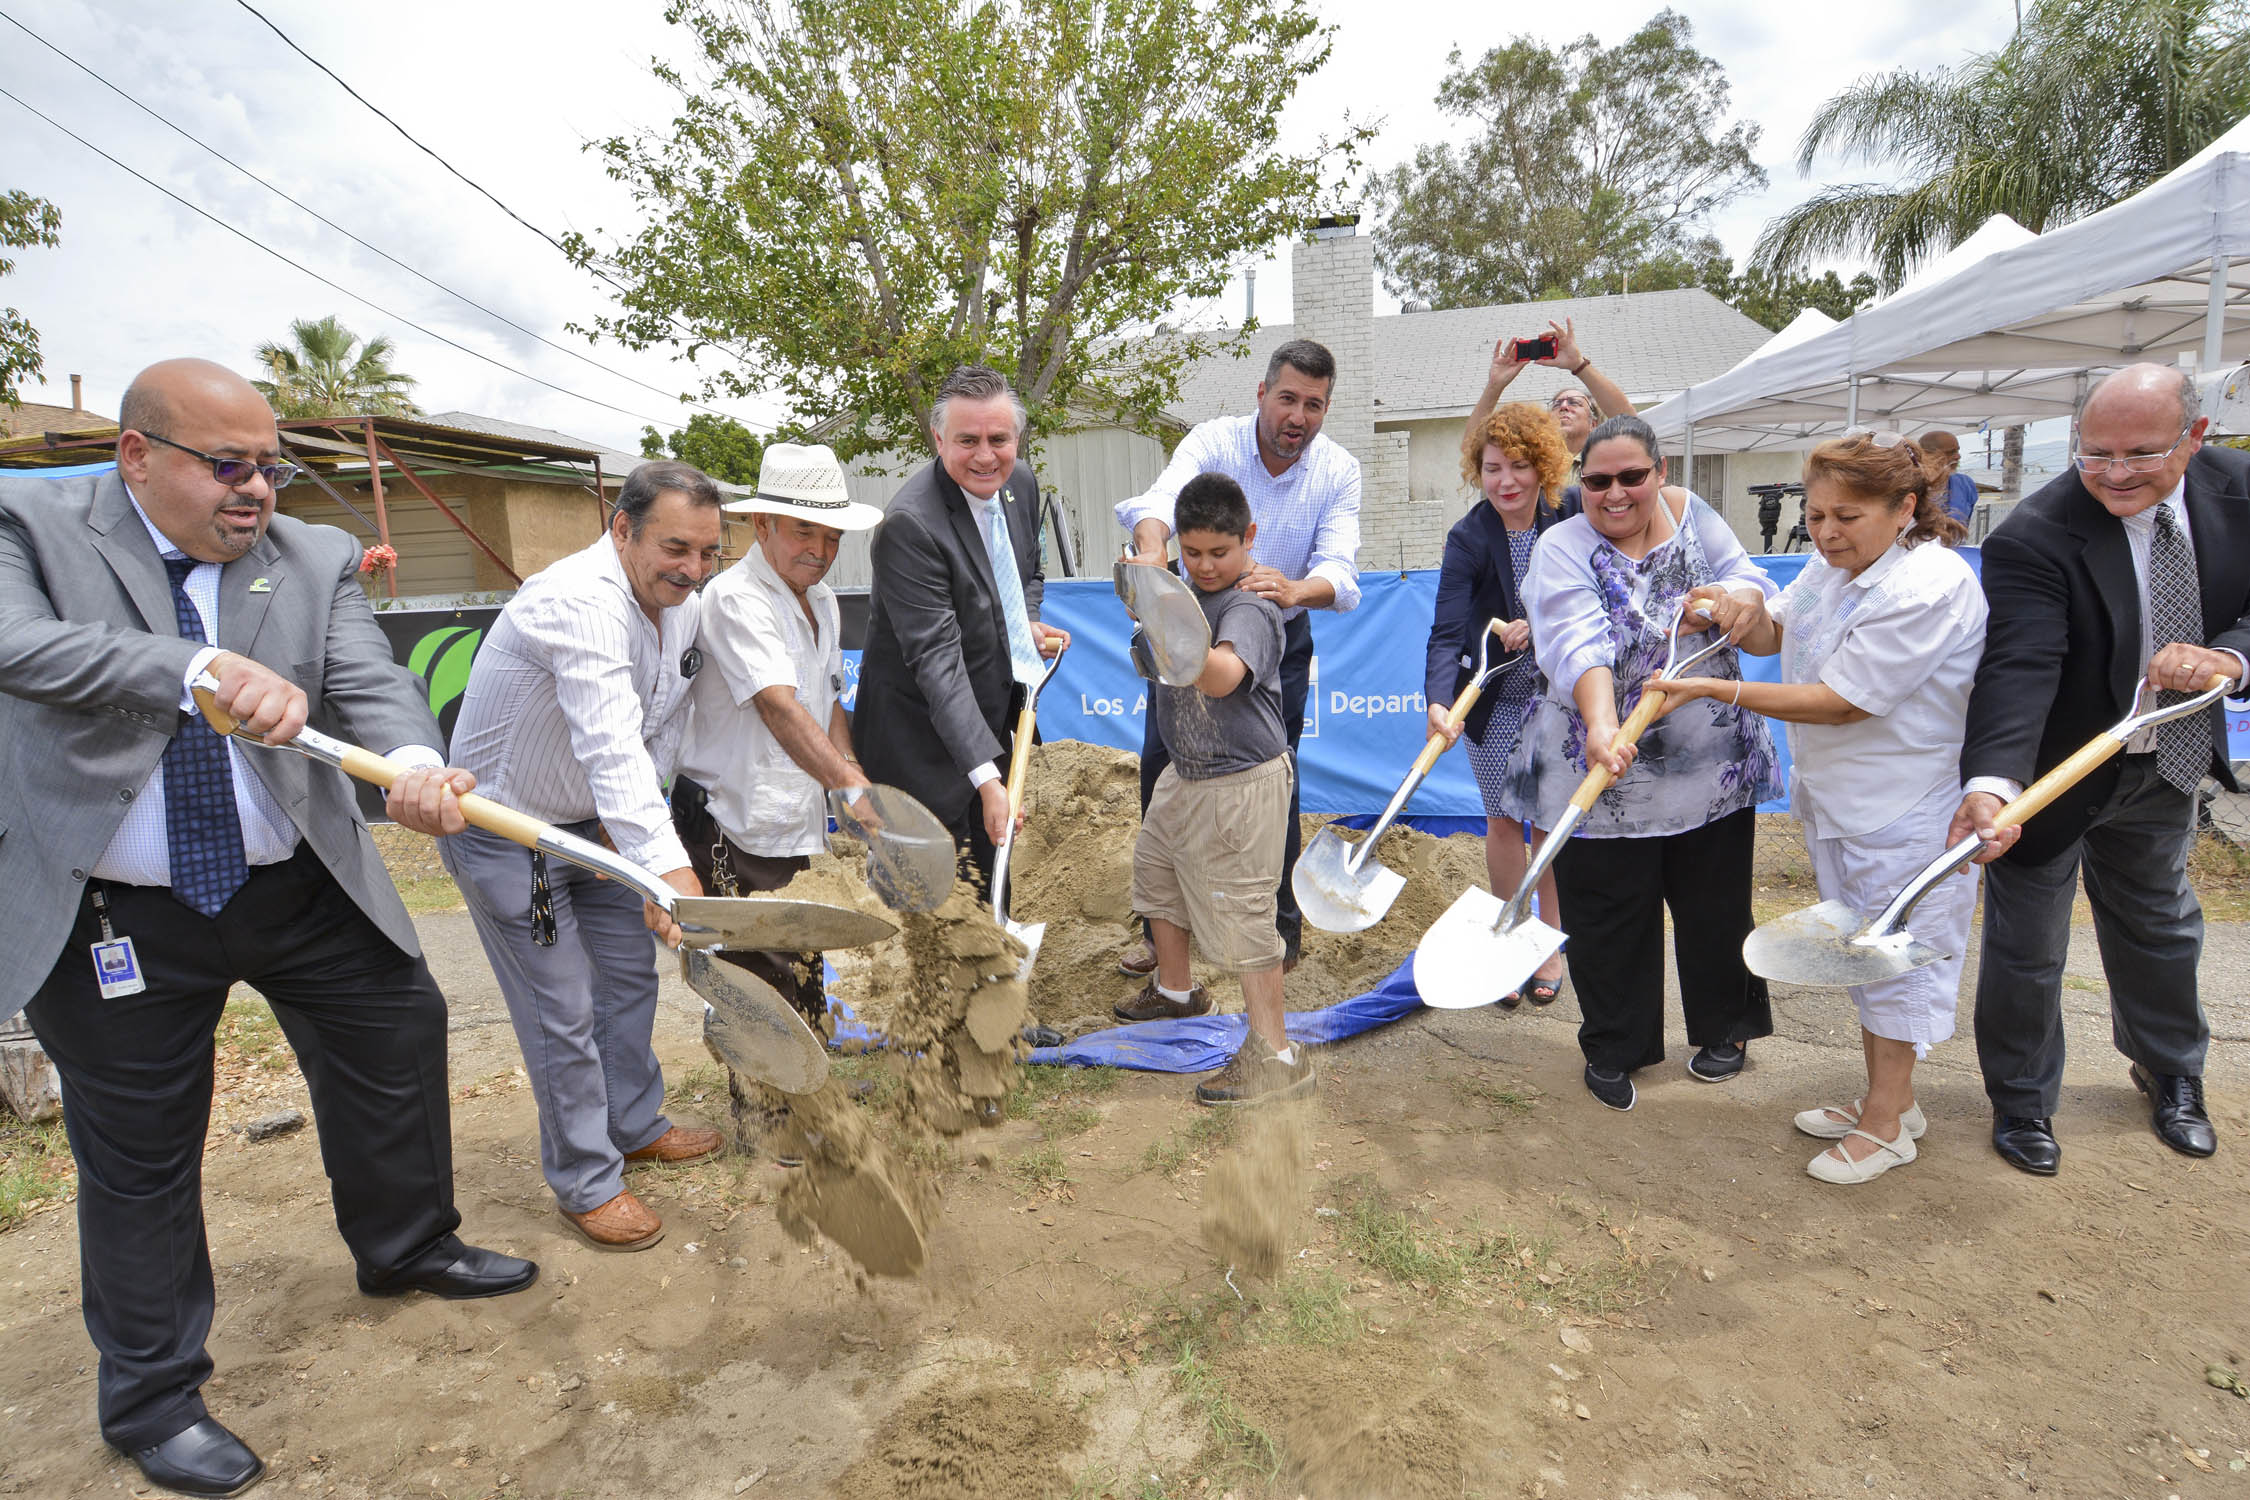 Los Angeles City Council member Felipe Fuentes, 7th District, and officials of LA Sanitation (LASAN) and the Los Angeles Department of Water and Power (LADWP) break ground on the Laurel Canyon Boulevard Green Street Project in Pacoima.(Photo Credit: Pacoima Neighborhood Council)